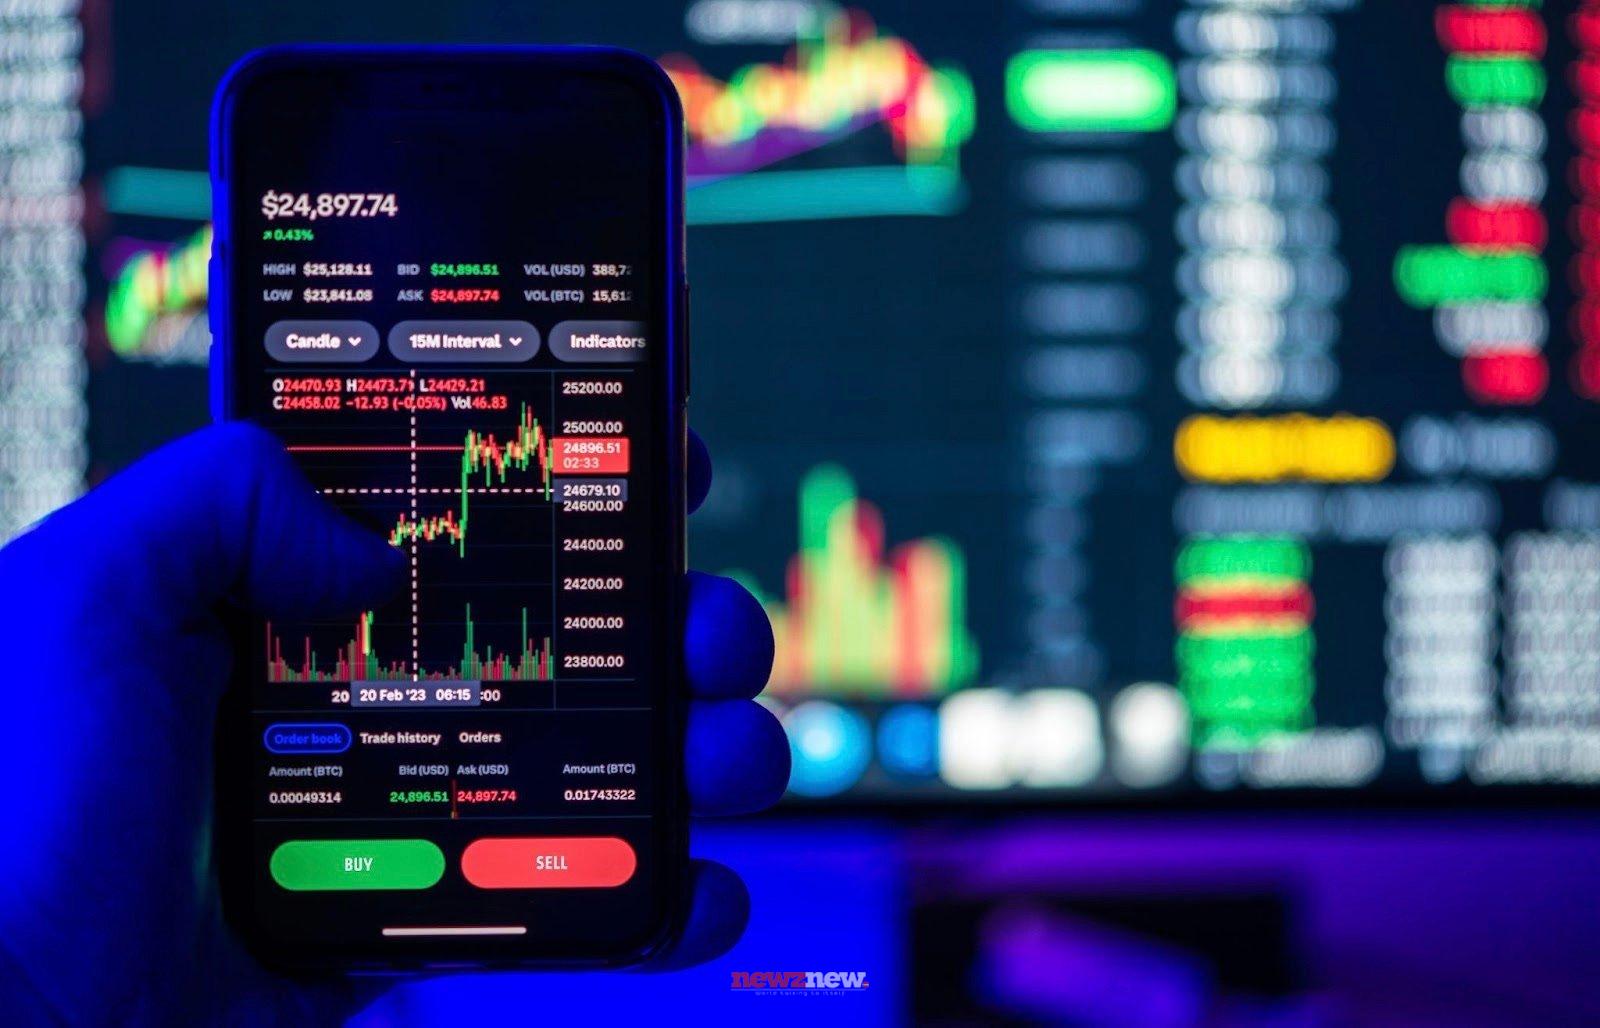 The Ultimate Guide to Finding the Perfect Web Trading Platform for Your Needs: Finding the best web trading platform to use in the field of online trading is not always easy. With so many possibilities, it's important to narrow in on the finest trading website for your needs.